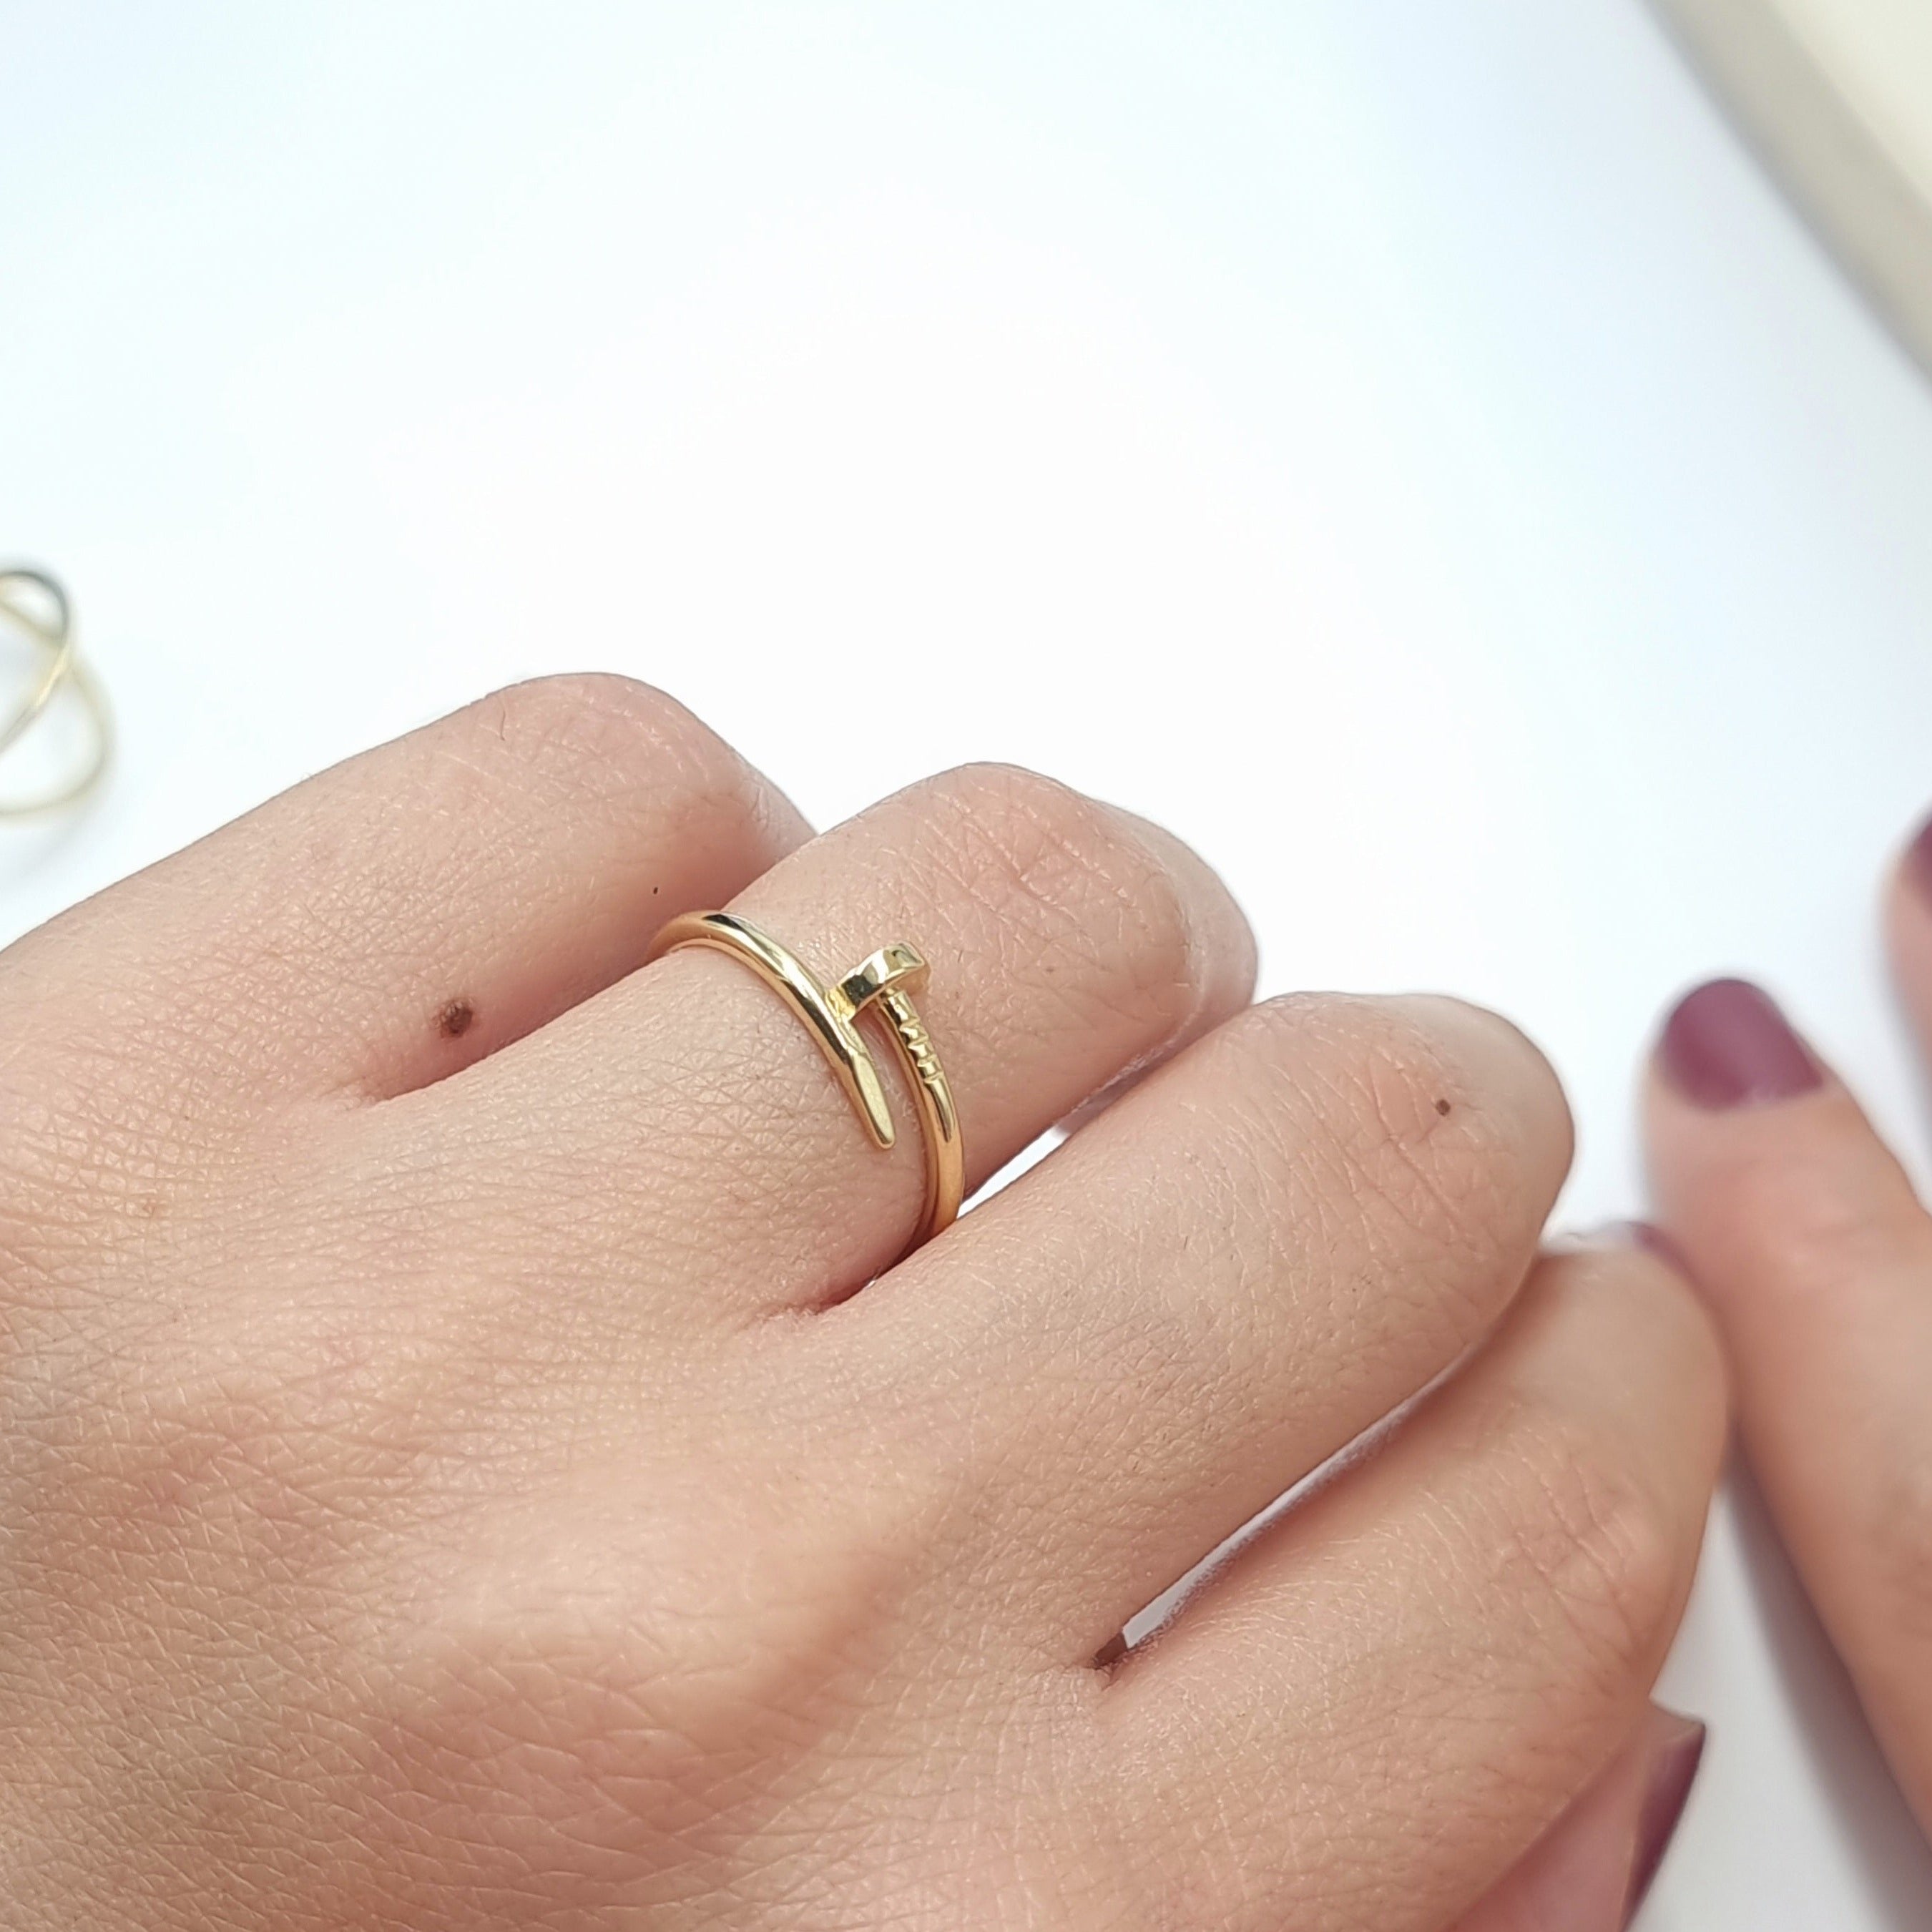 18 Engagement Nail Ideas That Will Look So Chic With Your New Ring